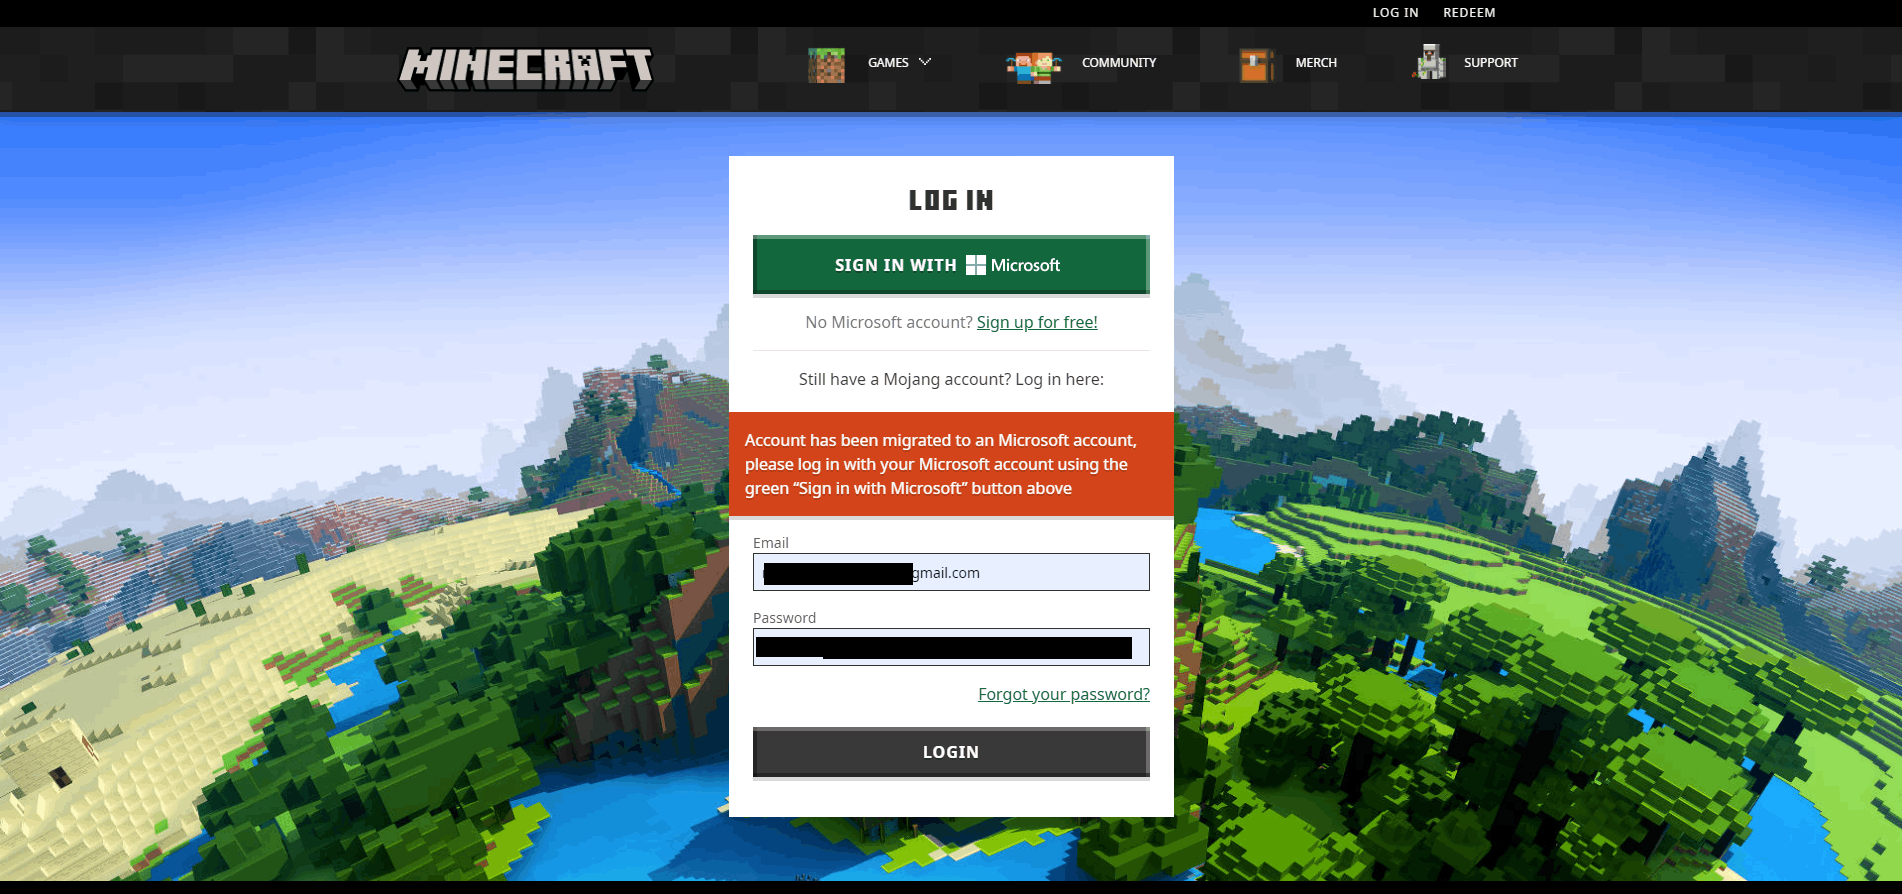 Account logs in as a demo account? - Mojang Account / Minecraft.net Support  - Archive - Minecraft Forum - Minecraft Forum